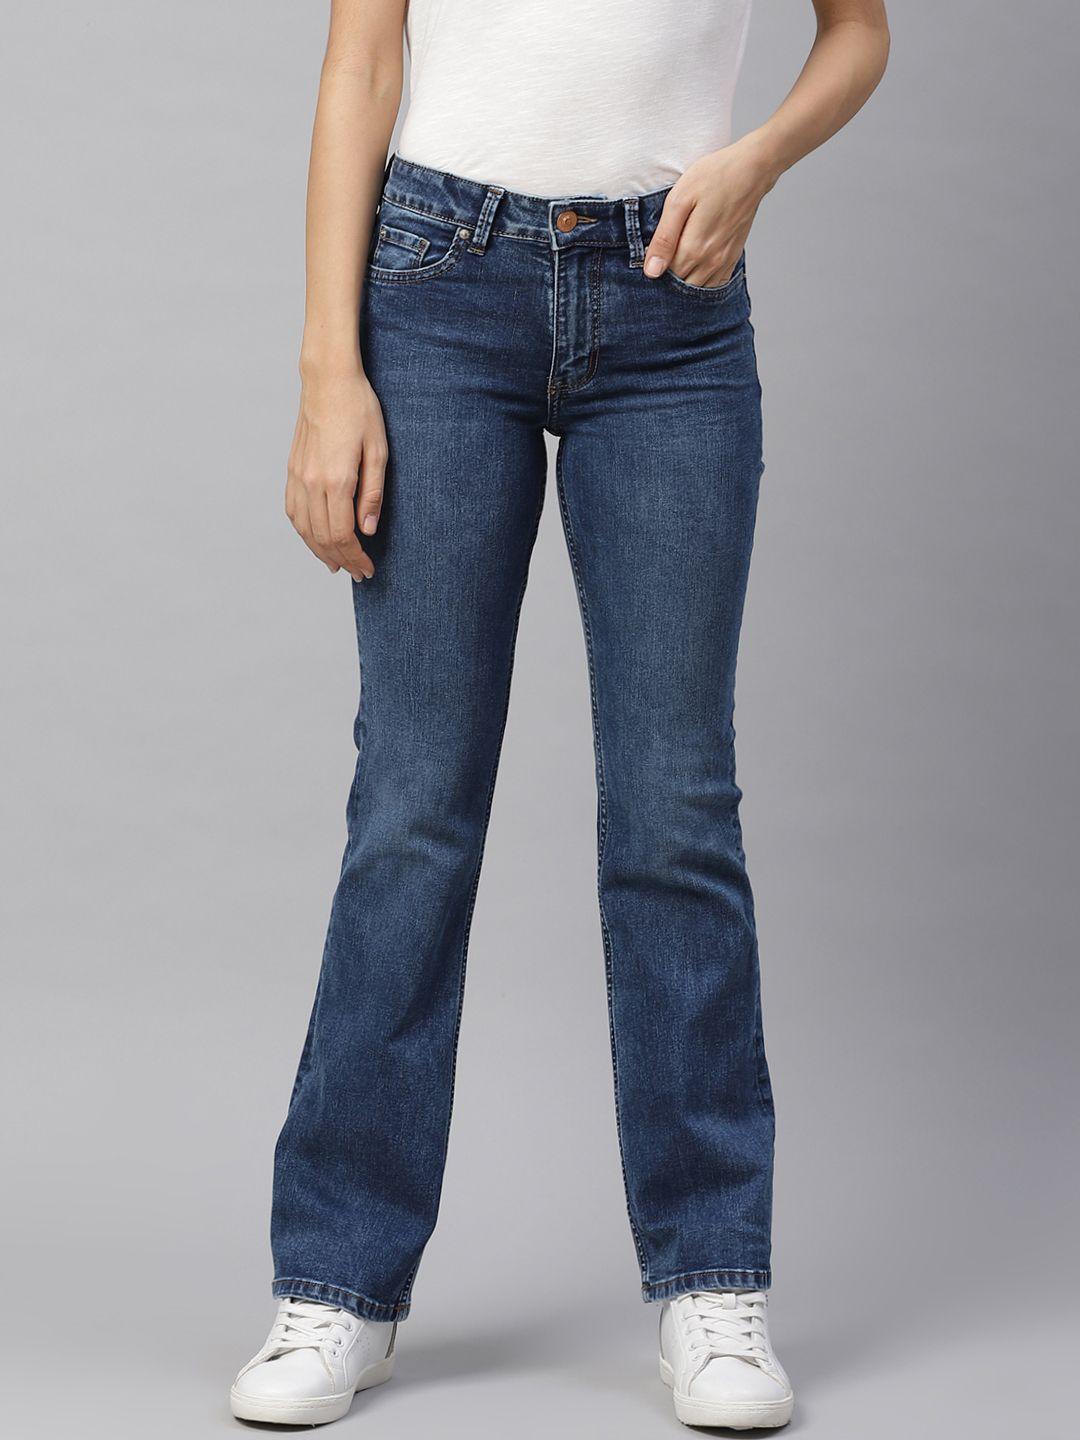 marks-&-spencer-women-blue-the-eva-bootcut-mid-rise-clean-look-stretchable-jeans